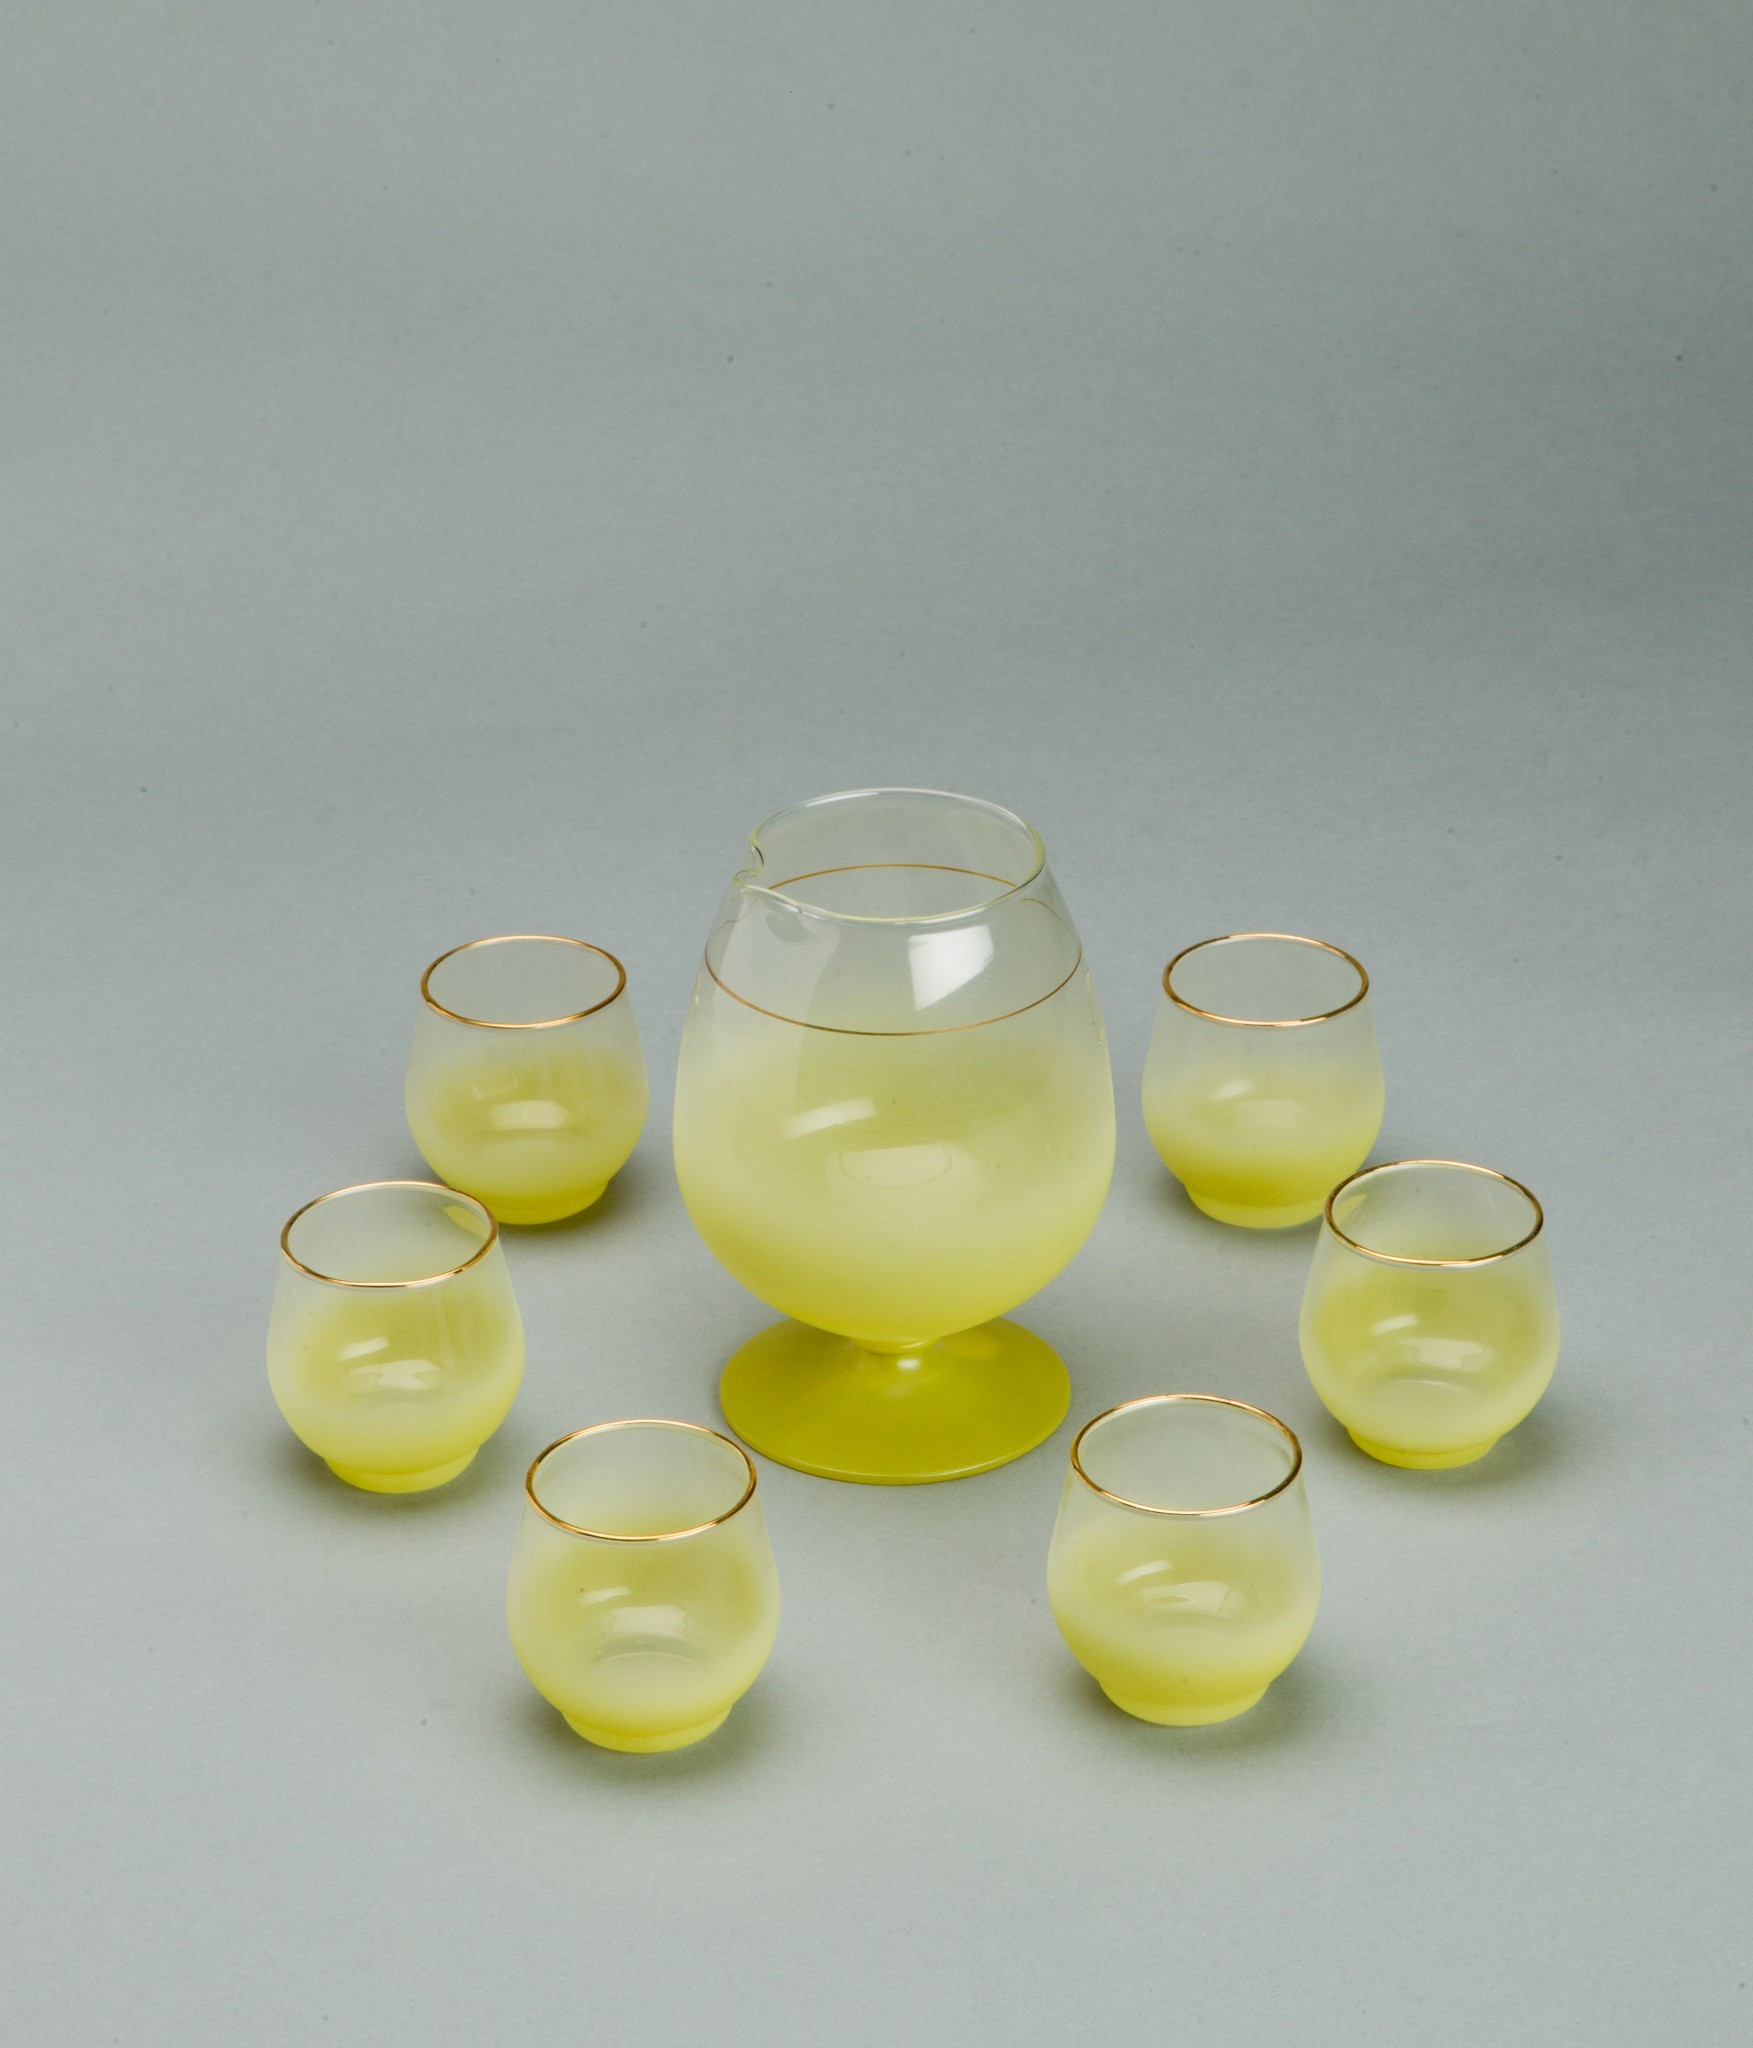 https://www.atomic-ranch.com/wp-content/uploads/2016/04/Atomic-Collectibles-Yellow-Blendo-Juice-Glass-Set.jpg